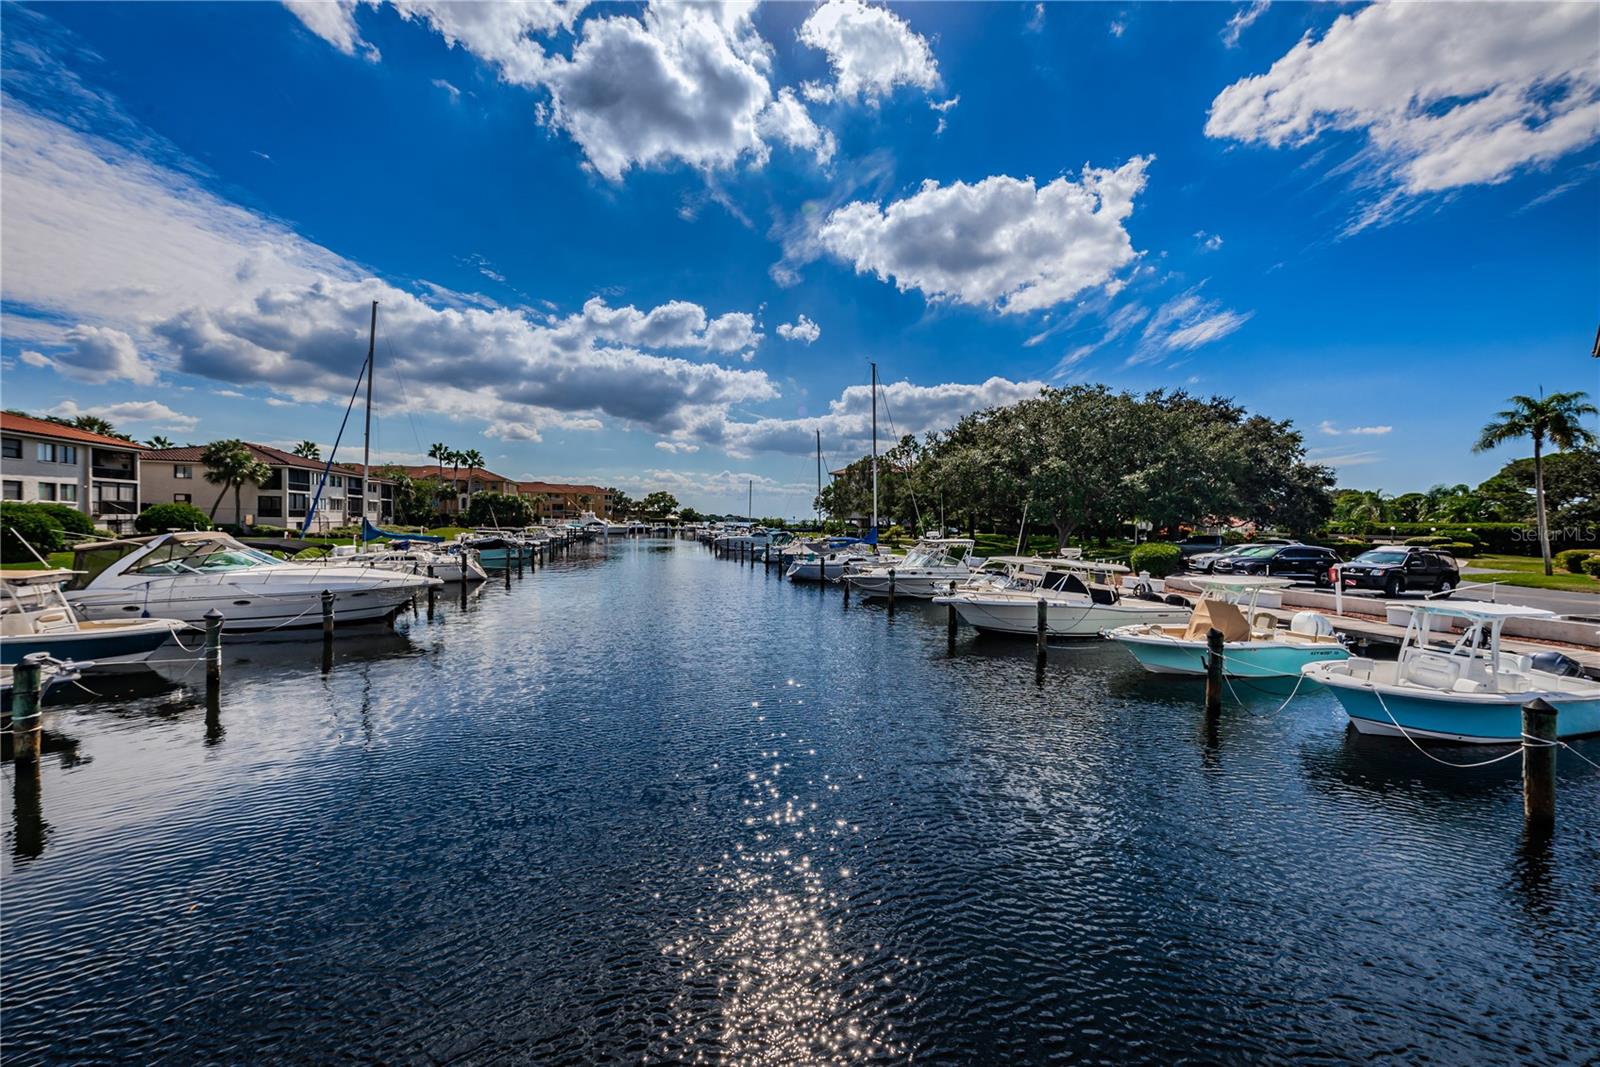 Tarpon Cove marina is on the east side of property